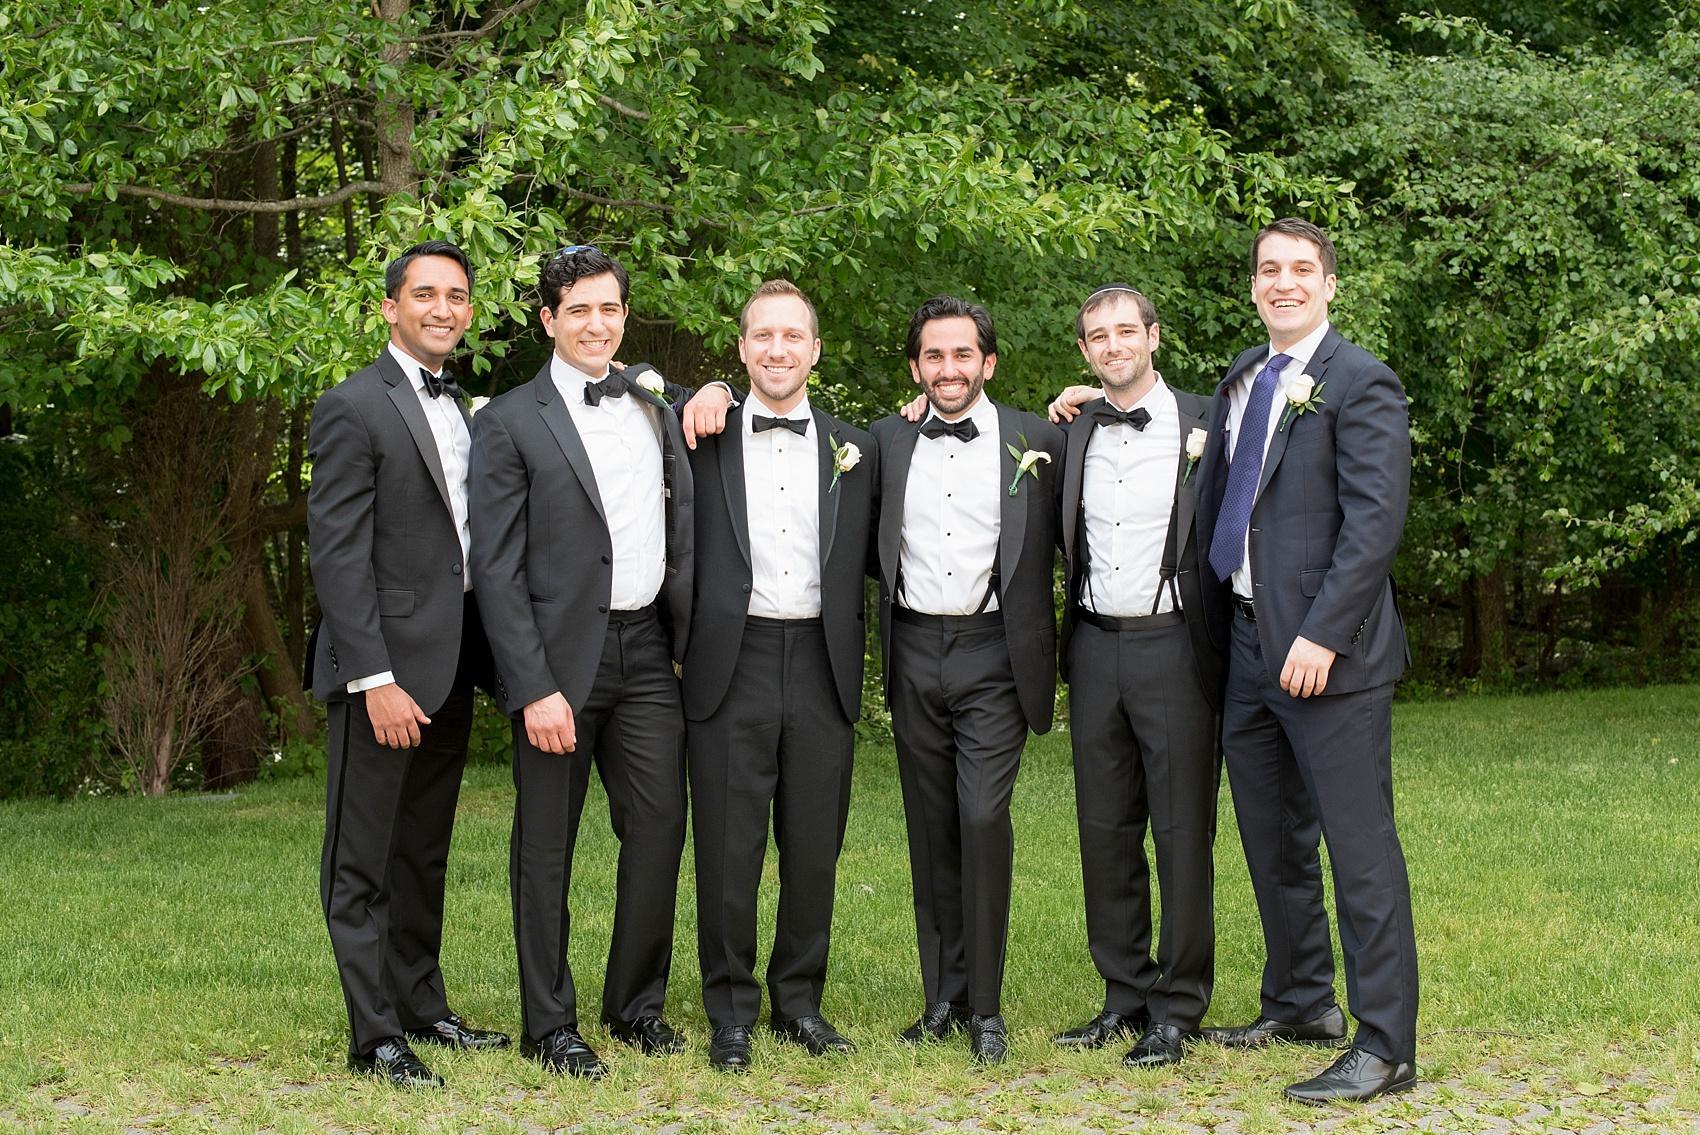 New Jersey wedding photos by Mikkel Paige Photography in Closter, NJ at Temple Emanu-el. Groom with his best guy friends.